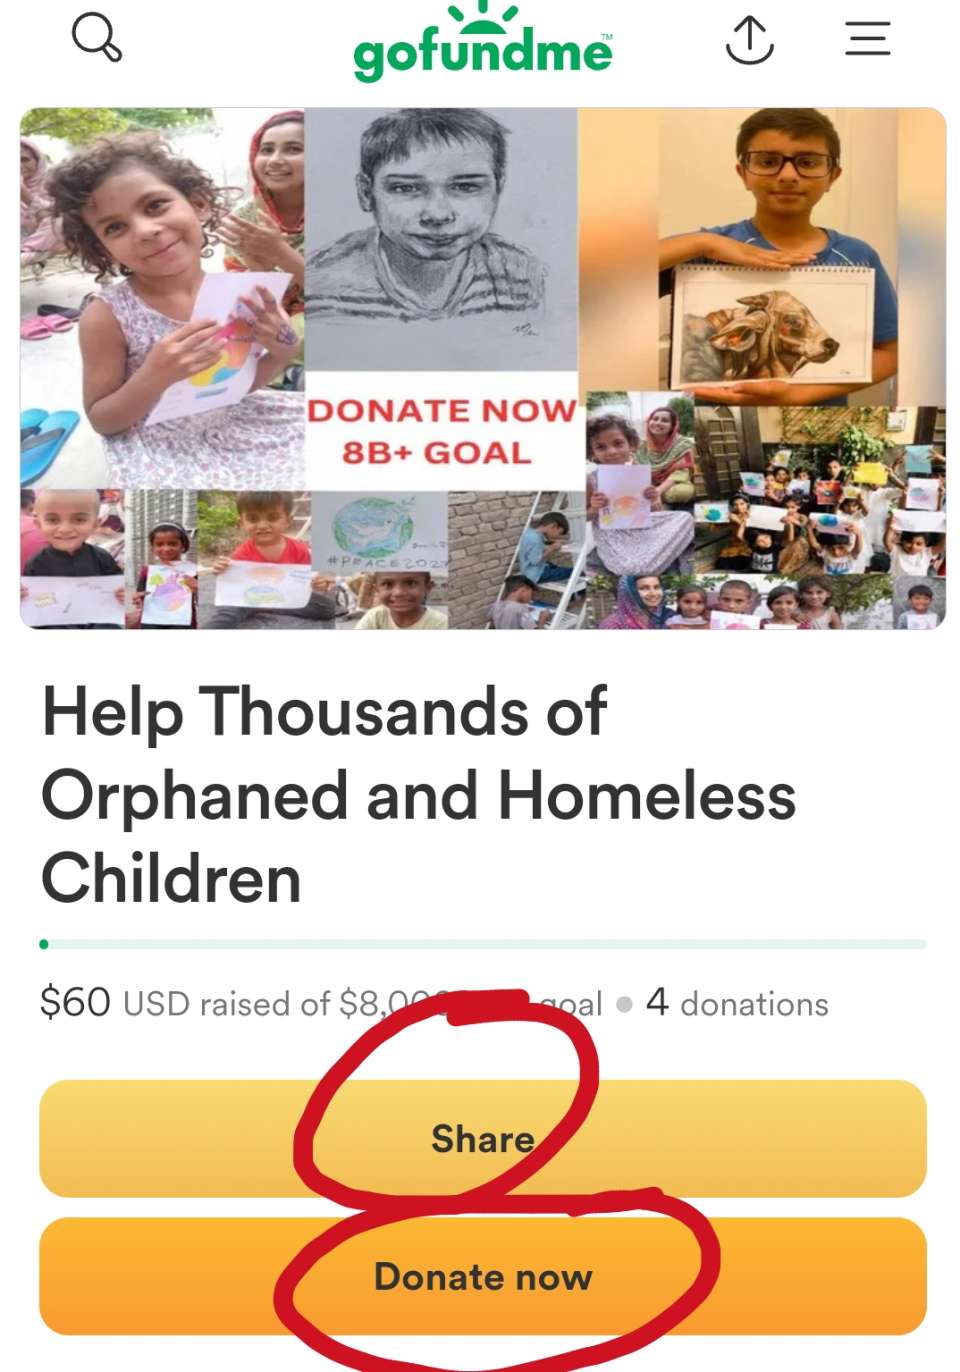 Hi it needs your 4+ shares Today and/or donation 👍 can you do it happily?<br /><br /> thank you very much my dear Global family 🌎❤️<br />for joining hands DAILY, for now we raise 60$.<br />Lets accelerate  to raiseup 1000$+ today<br />in simple steps:<br />share this Urgent campaign https://gofund.me/74b84d5b<br />in all social networks<br />at list 14 times +<br />in Facebook LinkedIn Twitter and with your friends and contacts<br />let's do a BIG IMPACT TODAY TO<br /><br /> GO VIRAL ok?<br /><br />Make a donation 1$+ by possibility today and write your heart 💖 touching  support message today on GoFoundme <br />Please put + to this message who SHARE this today<br /><br />Enjoy Video REPORT  https://youtu.be/bTNCgRA0vlg <br />IMPORTANT In the bright memory of Daniil, year around Famous drawing Contest for #Peace2027 is held, as Daniil has been drawing #PeacePictures in last days, we invite you to<br /><br />Happily donate today to the Daniil Foundation to support his cause https://www.gofundme.com/f/help-thousands-of-orphaned-and-homeless-children https://ivacademy.net/en/donate  <br /><br />Enjoy Sharing today this foundation with friends and wide in social networks to GRANT you and  all 8B+ people participate and complete ultimate Global peace building by 2027 in every country ok?<br /><br />Yours @Prophet Nicolae Cirpala +79811308385 Tel WhatsApp❤